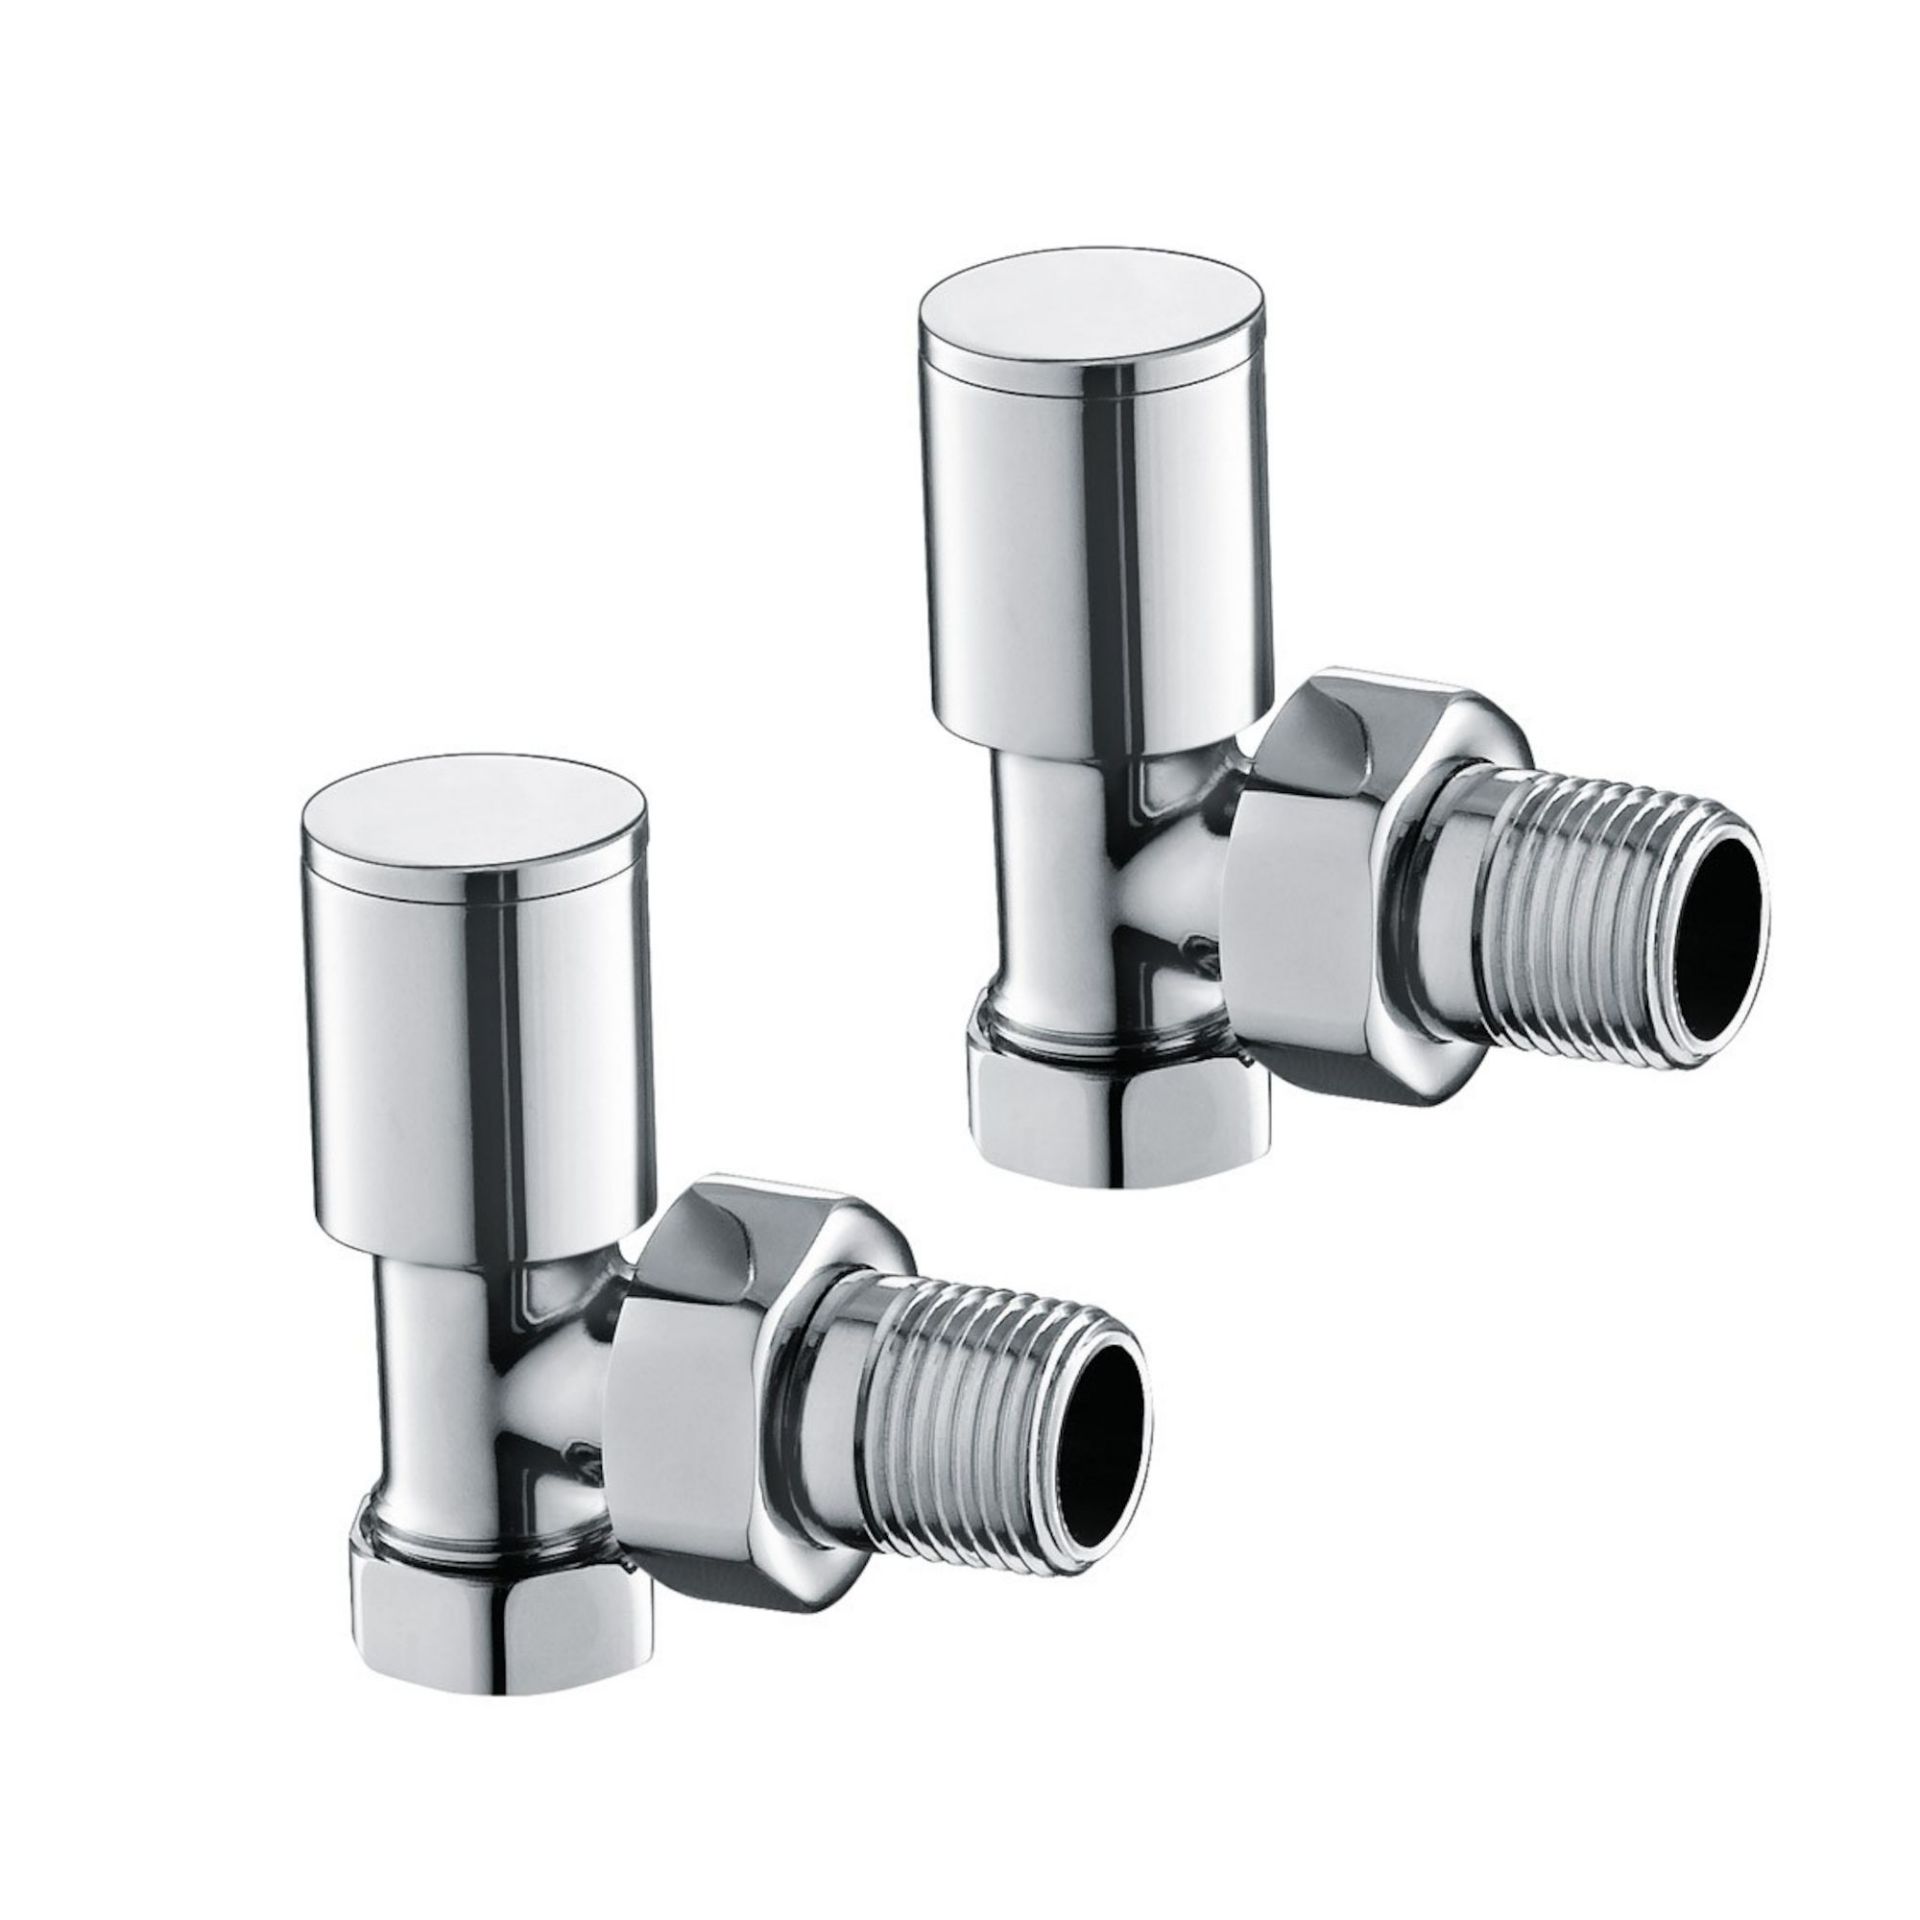 (V51) 15mm Standard Connection Angled Radiator Valves - Heavy Duty Polished Chrome Plated Brass - Image 2 of 3